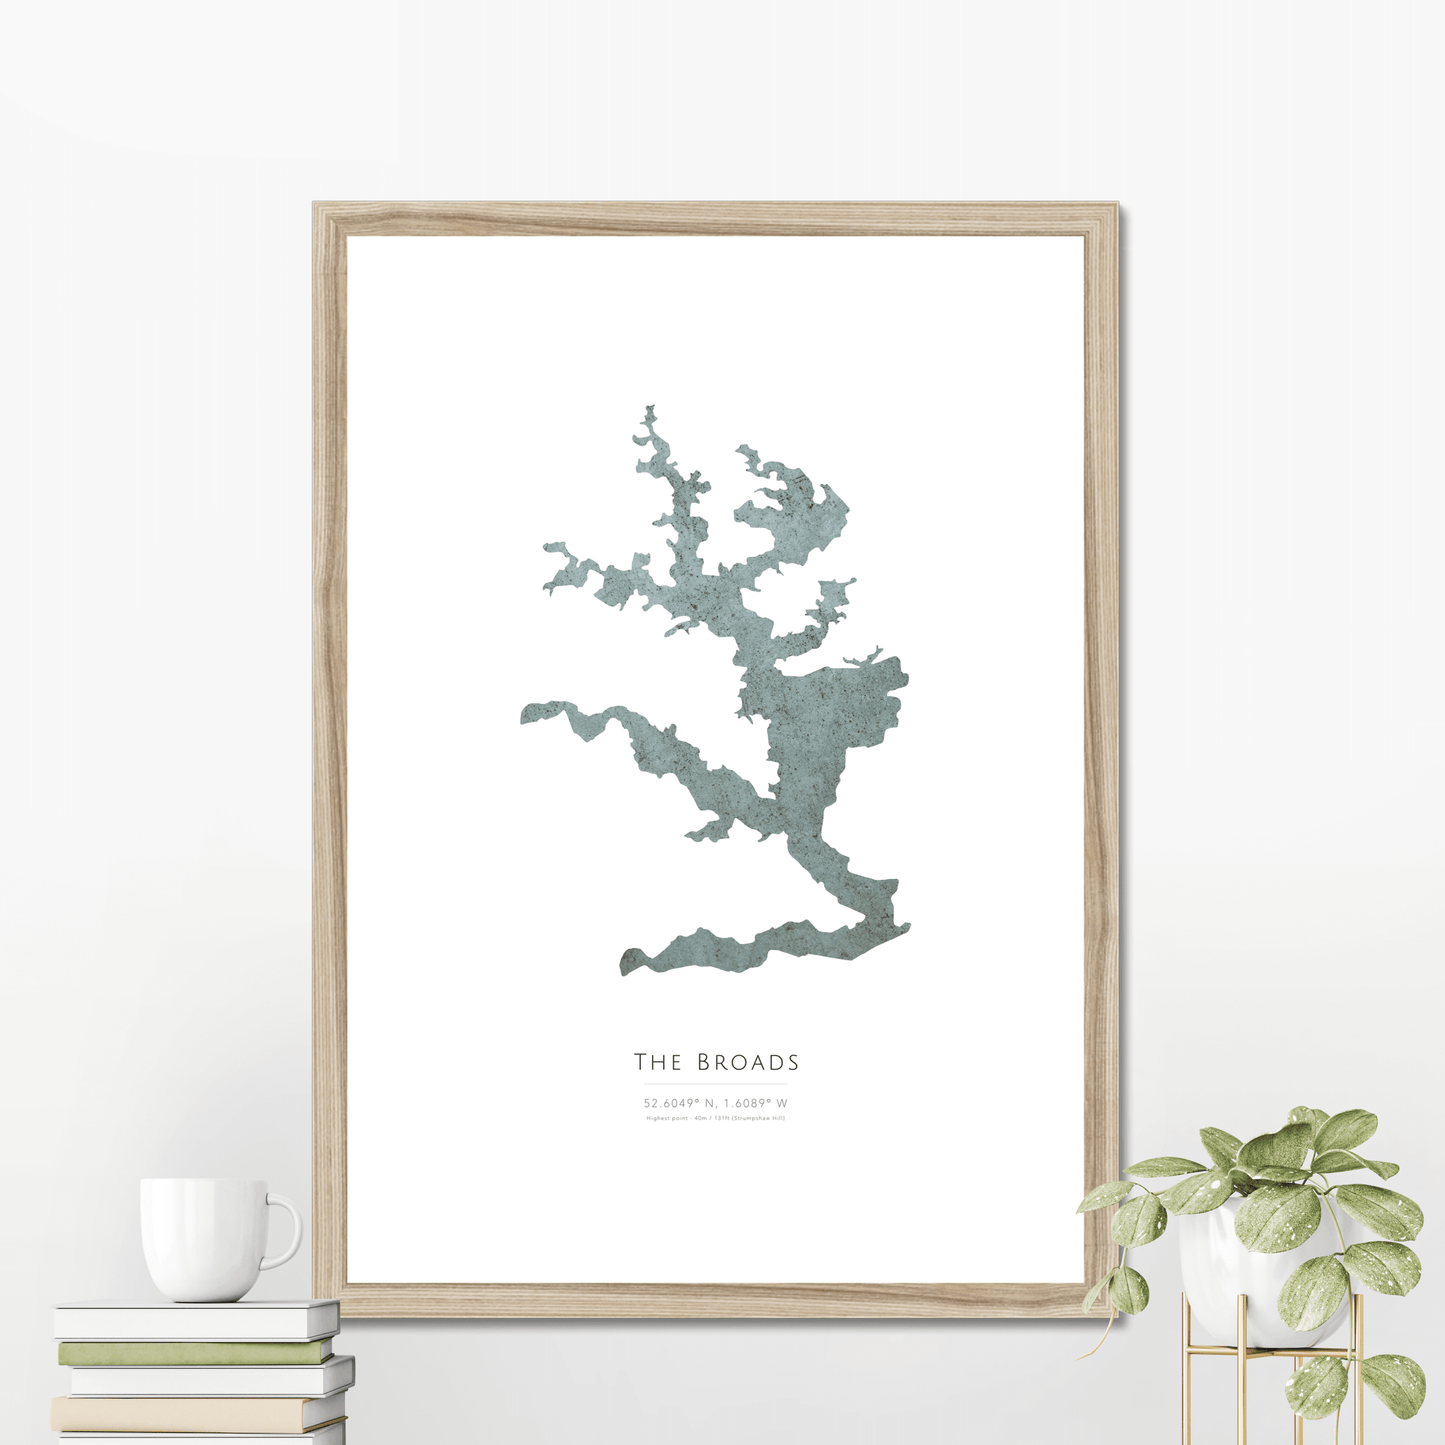 The Broads -  Framed & Mounted Map